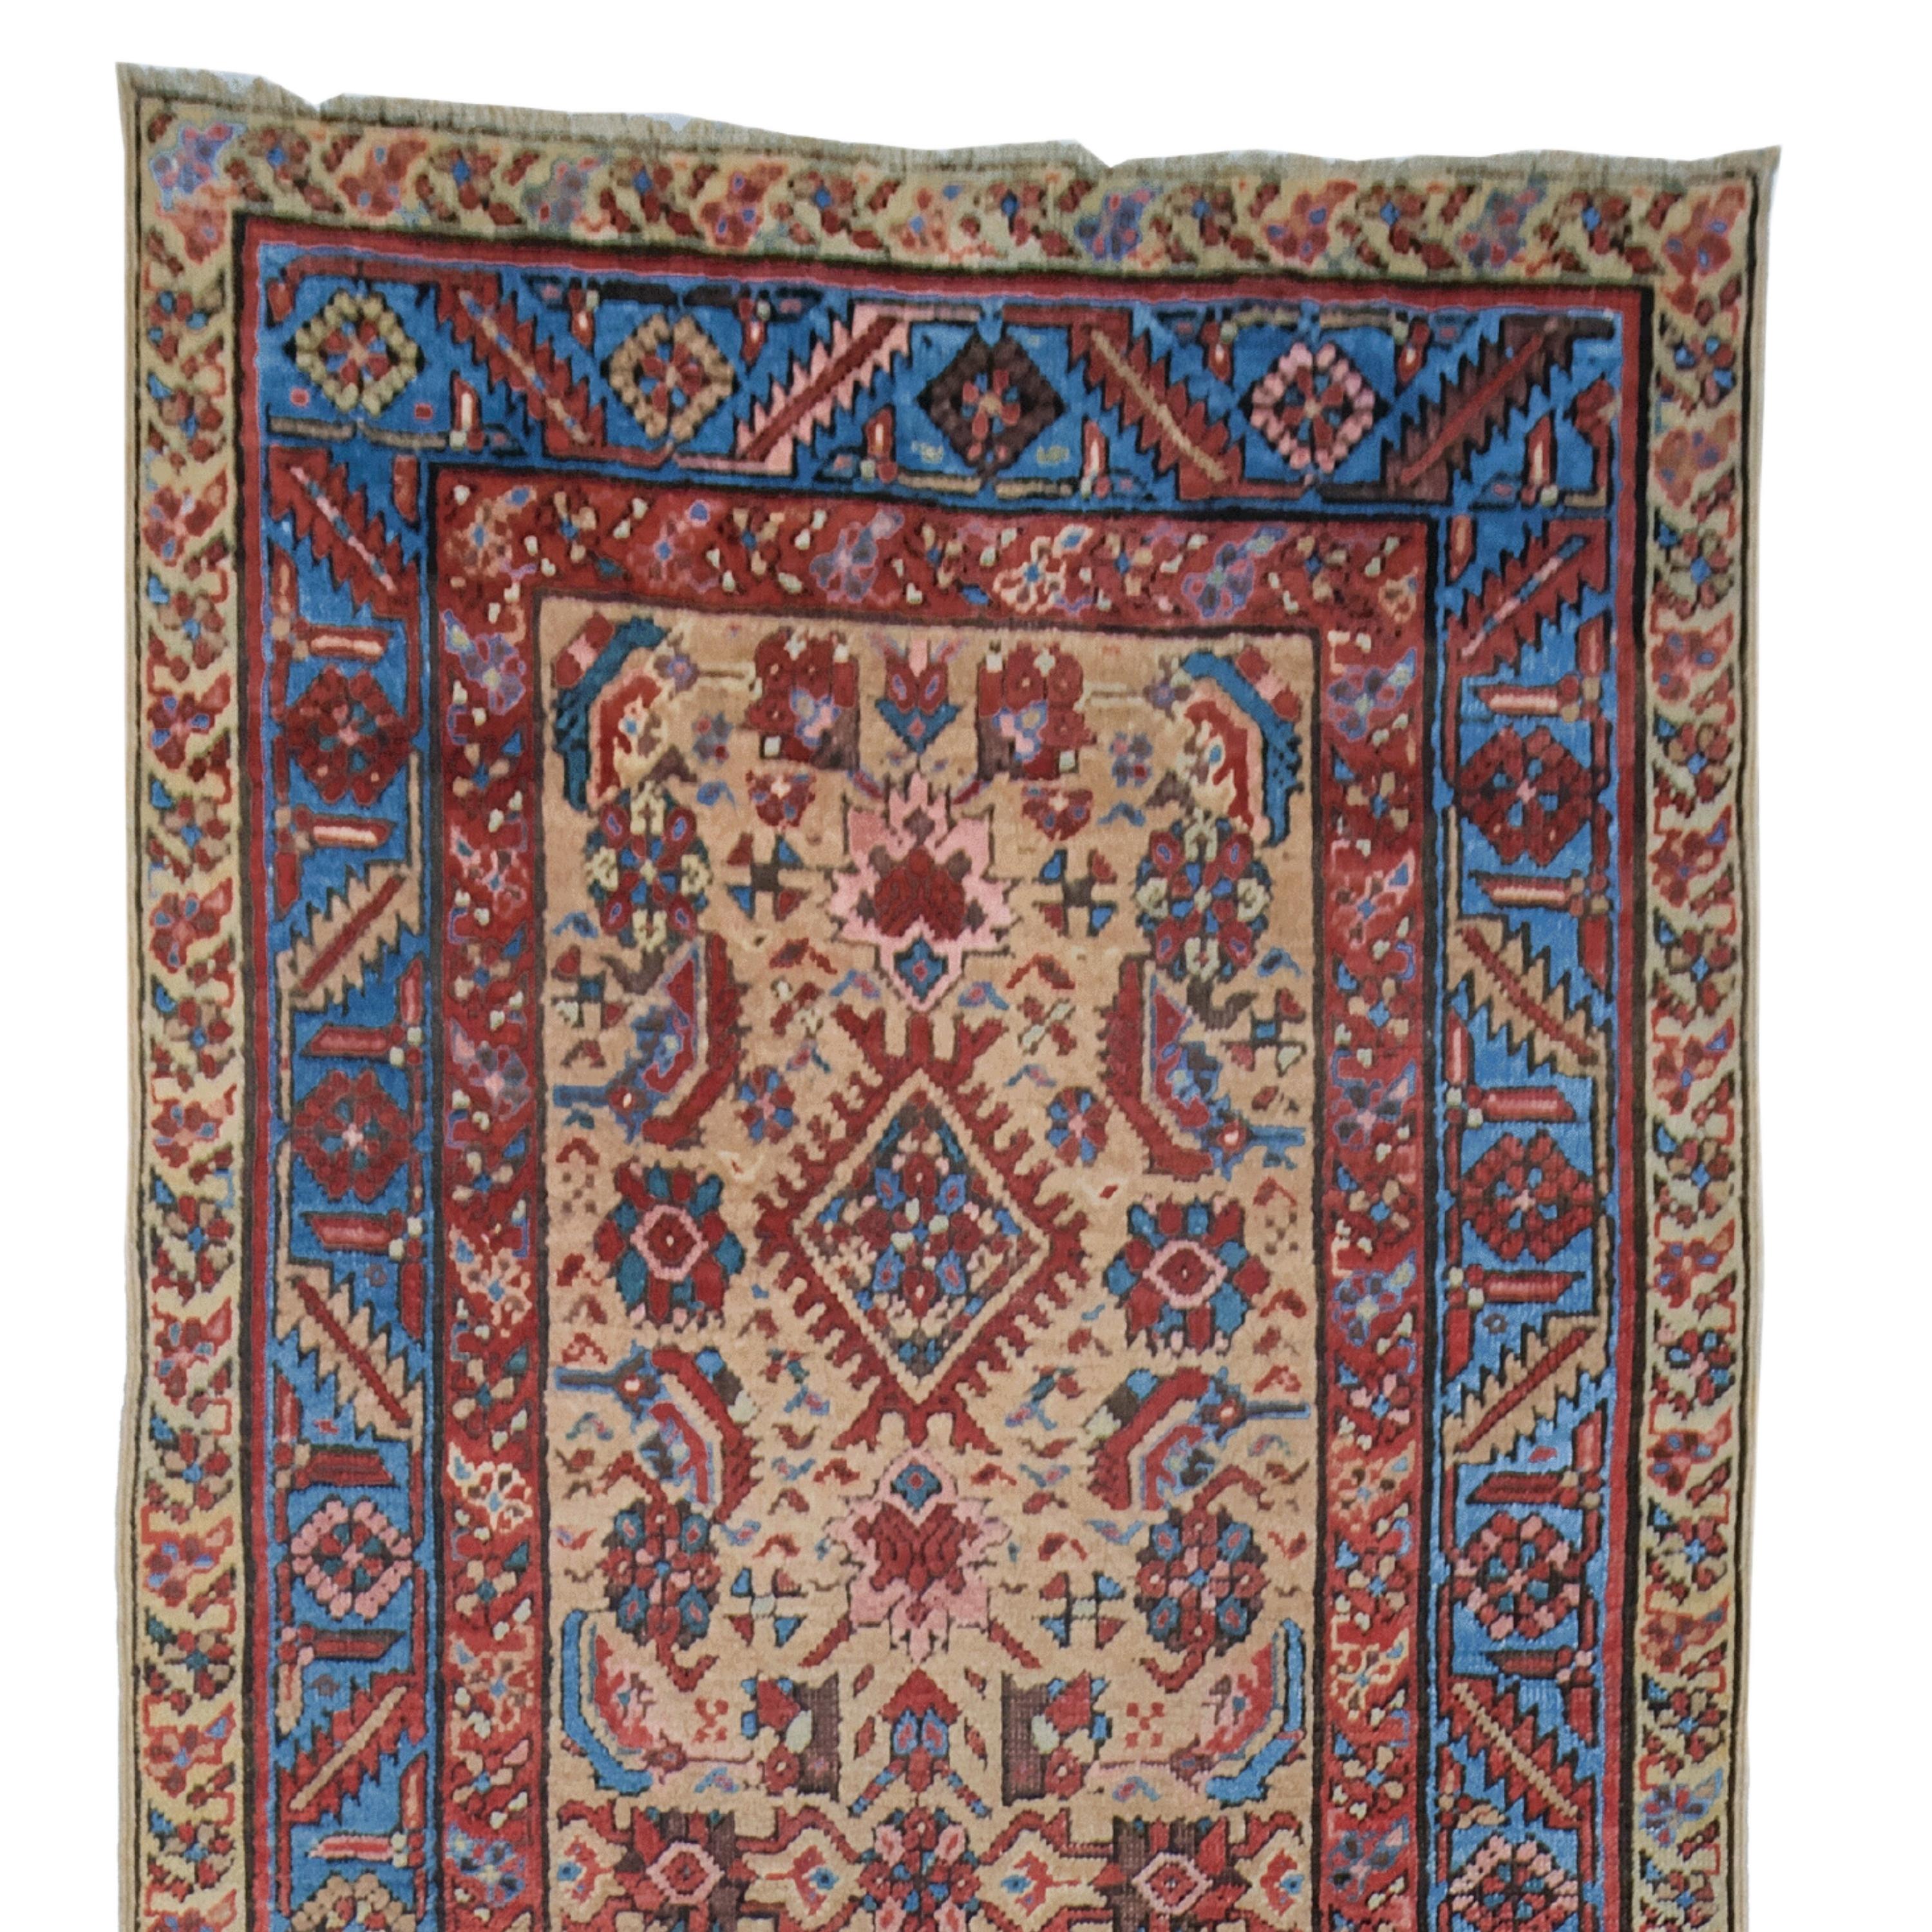 We offer a gorgeous 19th century antique Bakshaish runner that will leave you feeling like you've stepped back in time. This runner is a masterpiece with its intricate design and rich history. Each stitch tells a story of ancient artistry, adding an